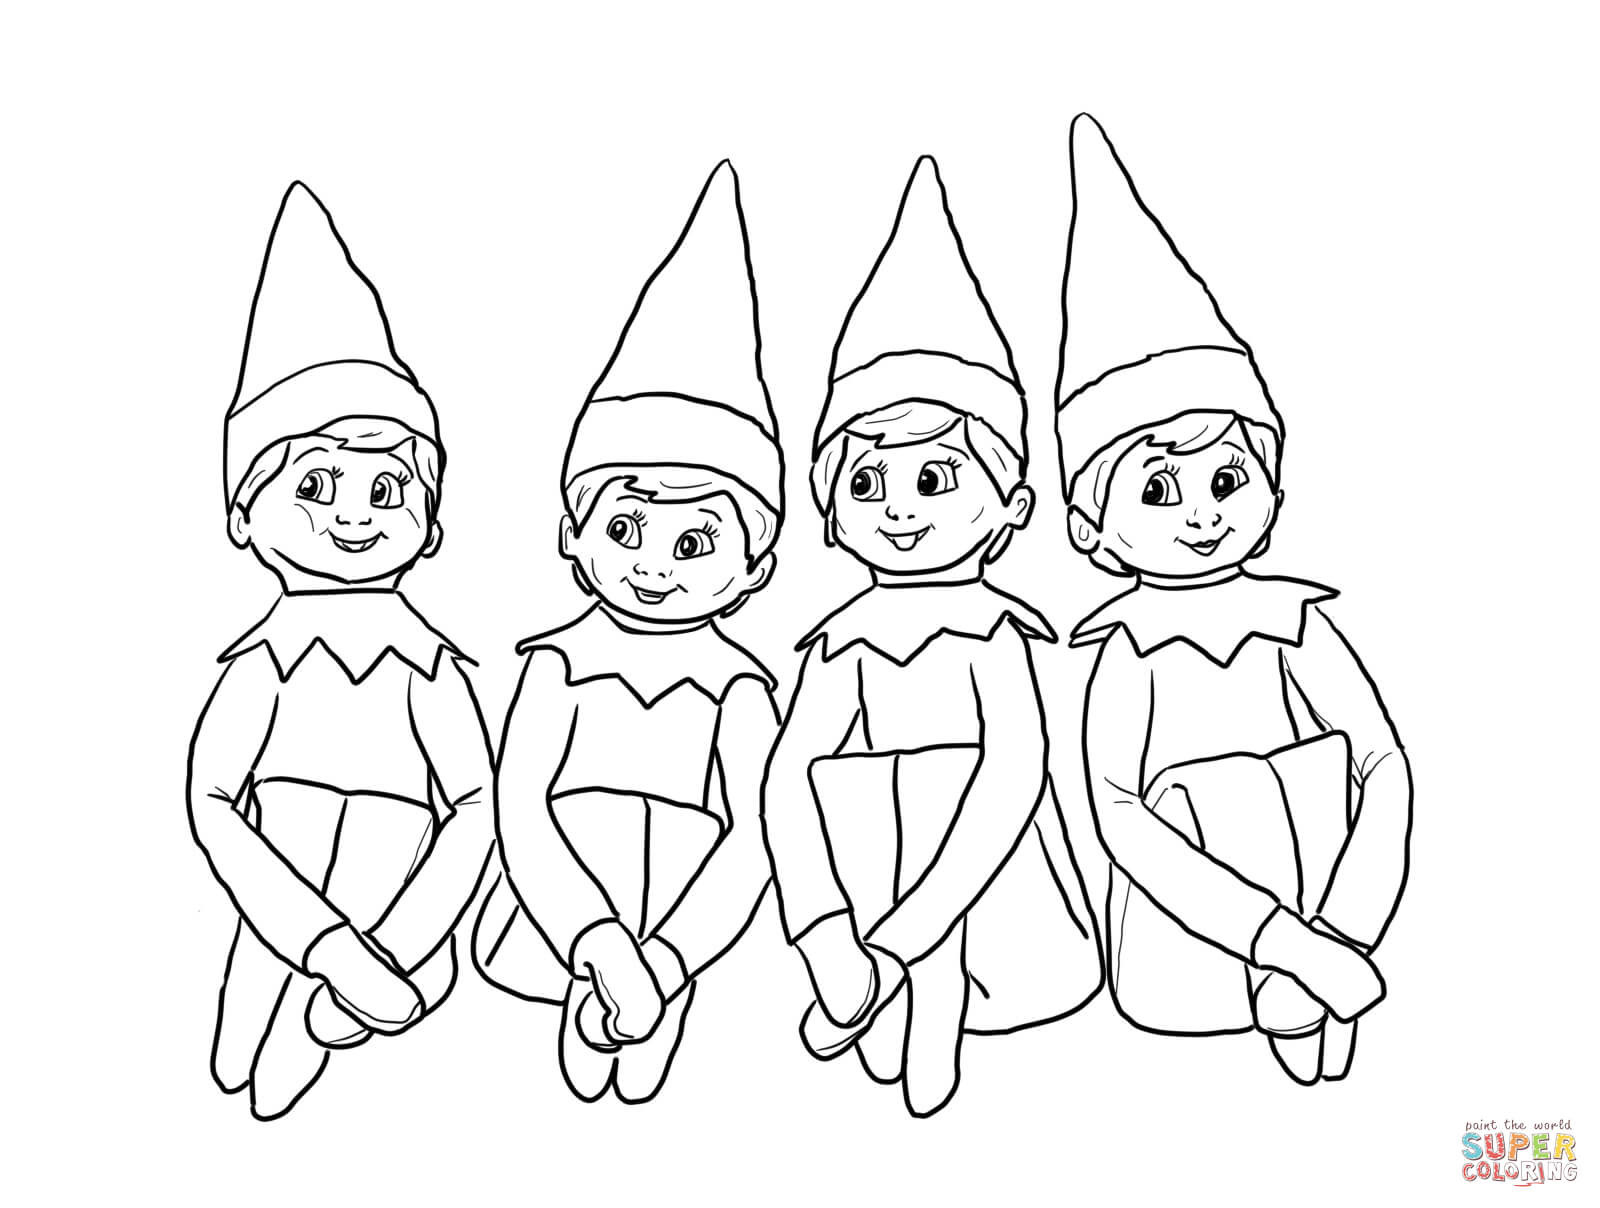 Elf Coloring Pages For Boys
 Elf The Shelf Coloring Pages To Print Coloring Home